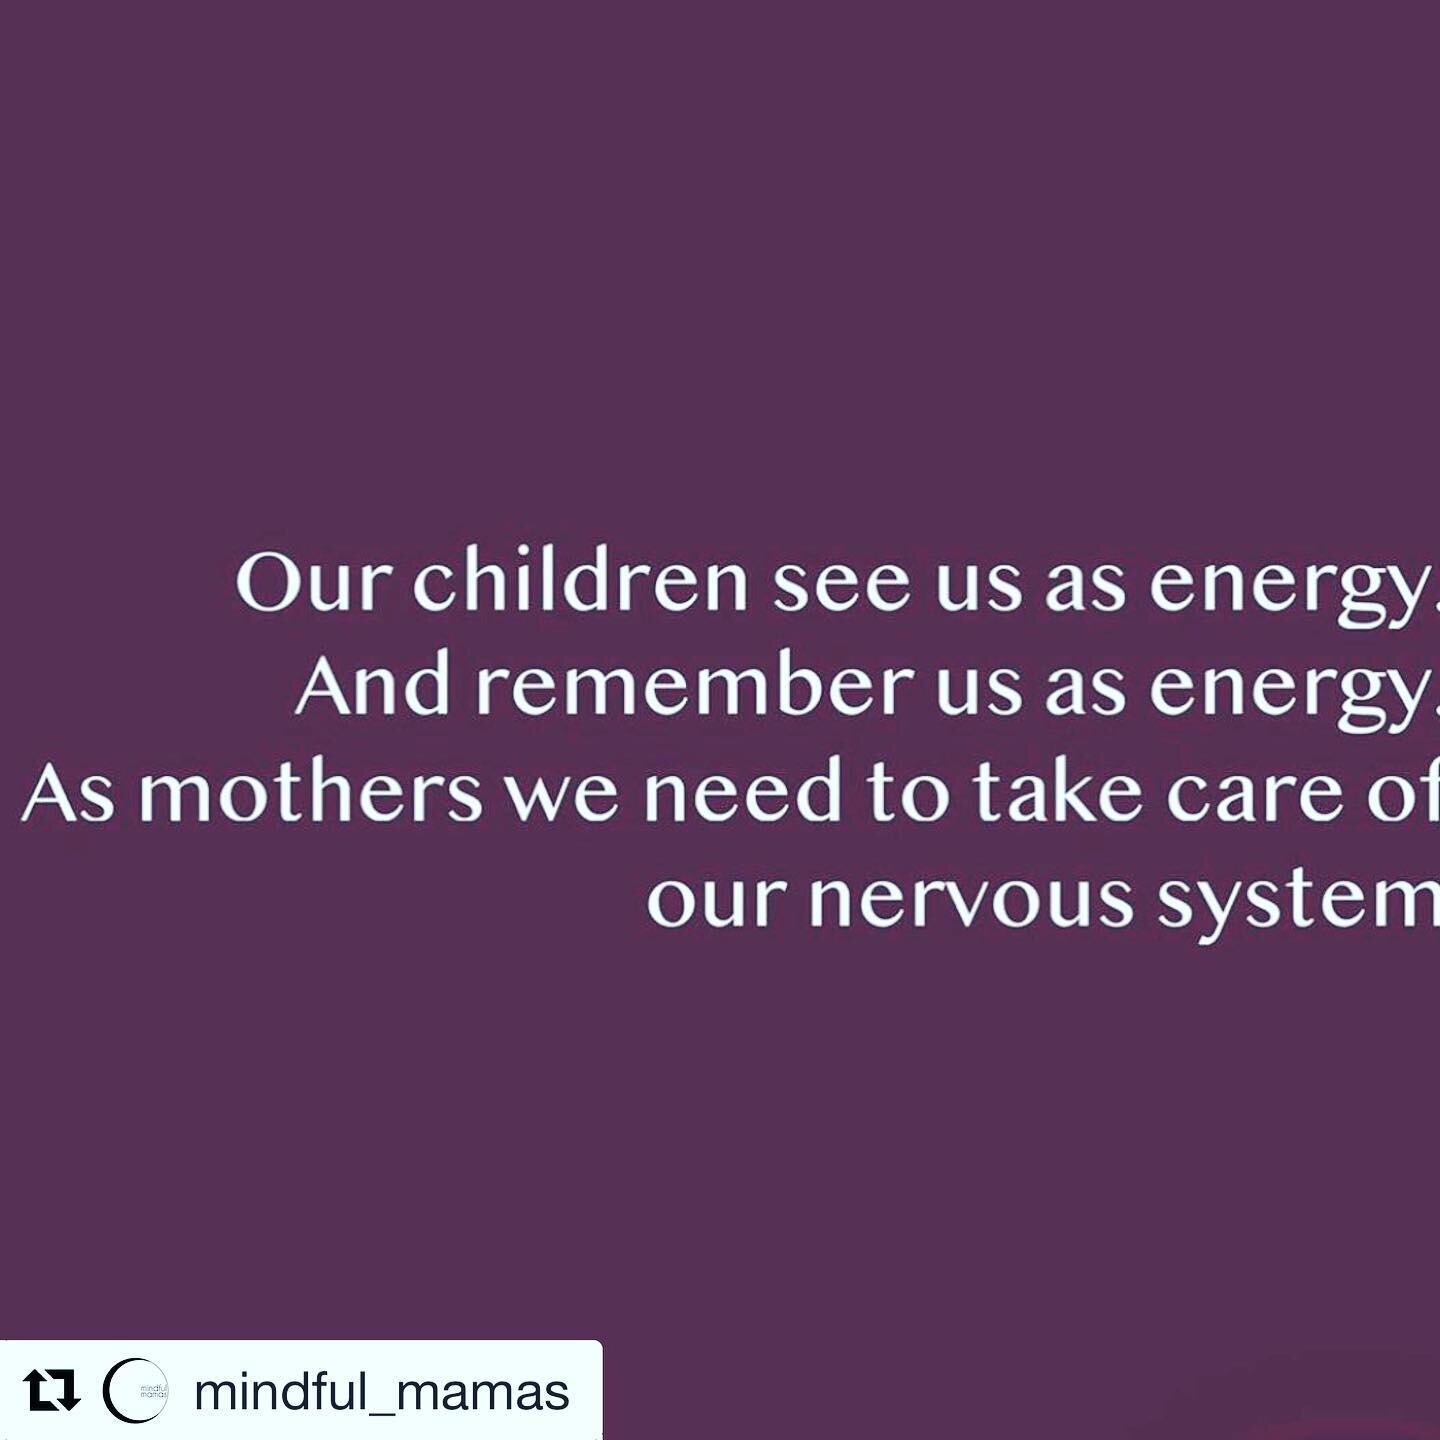 This hit me in theee heart!!!! Take care mamas!!! #Repost @mindful_mamas with @get_repost
・・・
How?

Sleep
Breathwork
Yoga Nidra
Time in nature
Hot baths
Journaling
Boundaries
Tough conversations 
Radical acceptance
Whole, unprocessed foods
Staring at